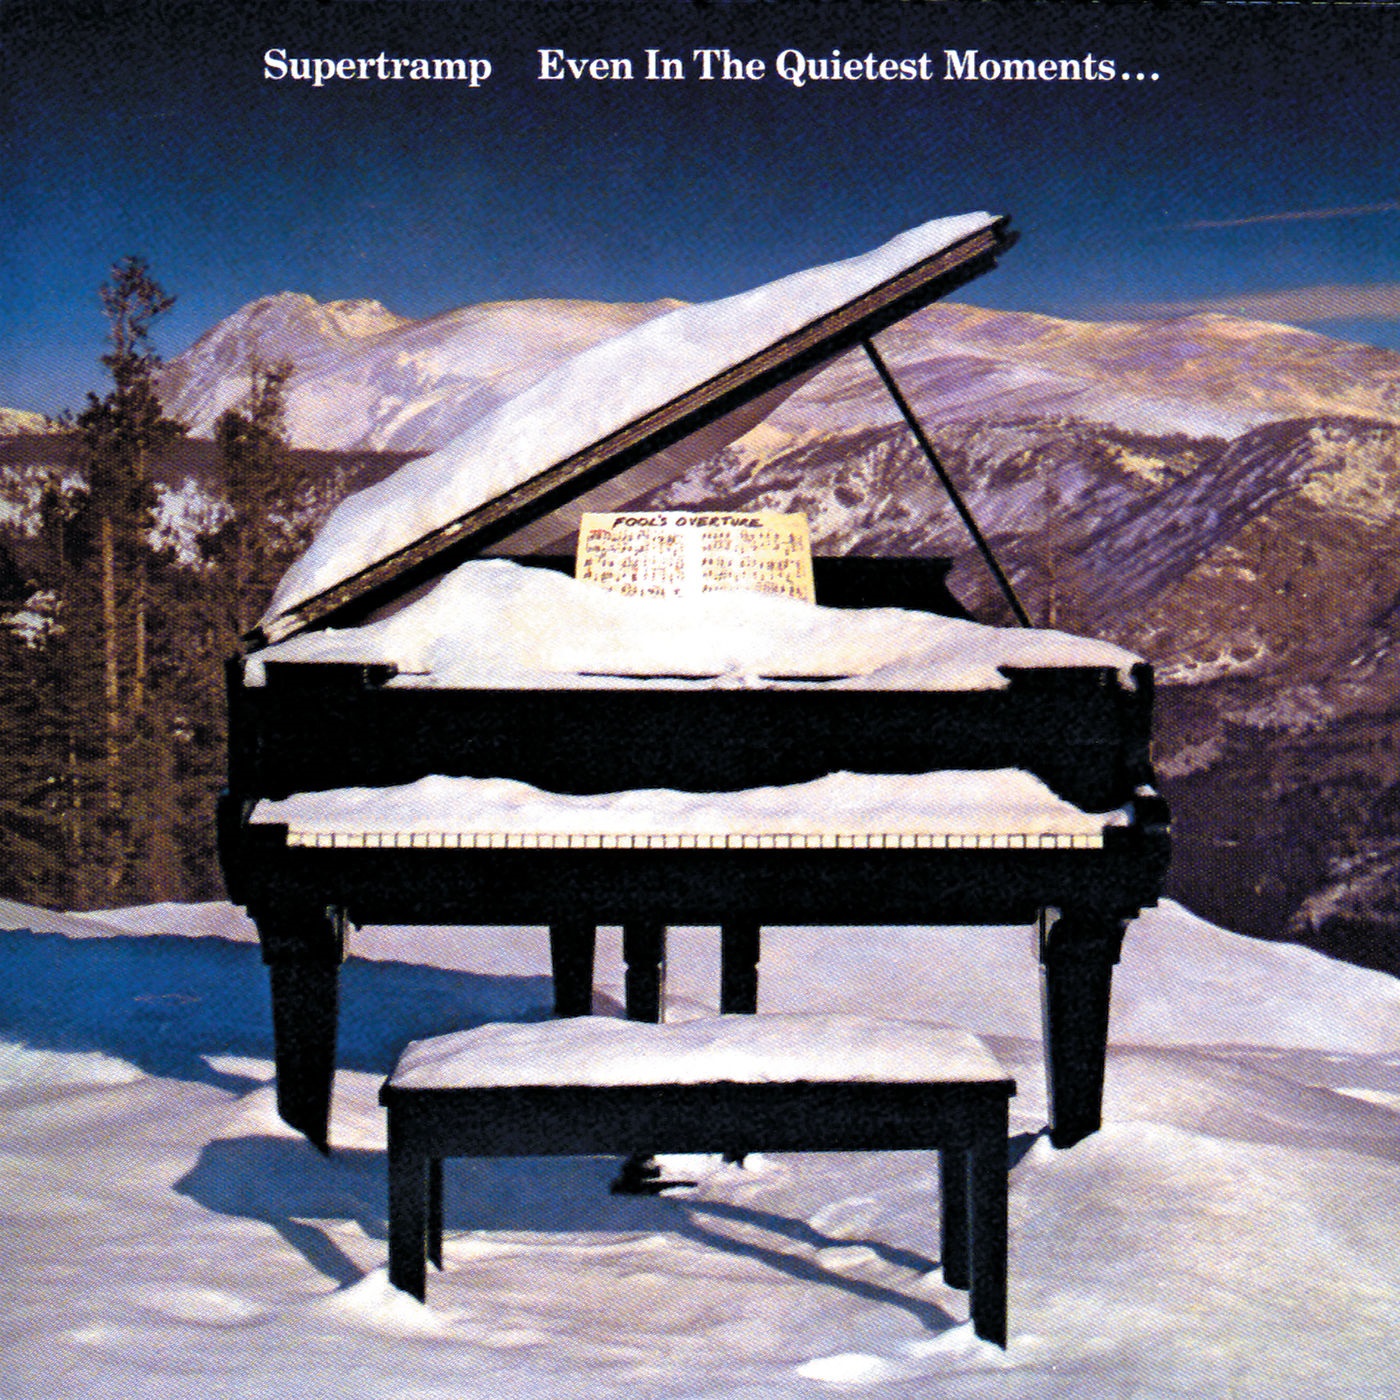 Supertramp – Even in the Quietest Moments… (1977/2020) [FLAC 24bit/96kHz]